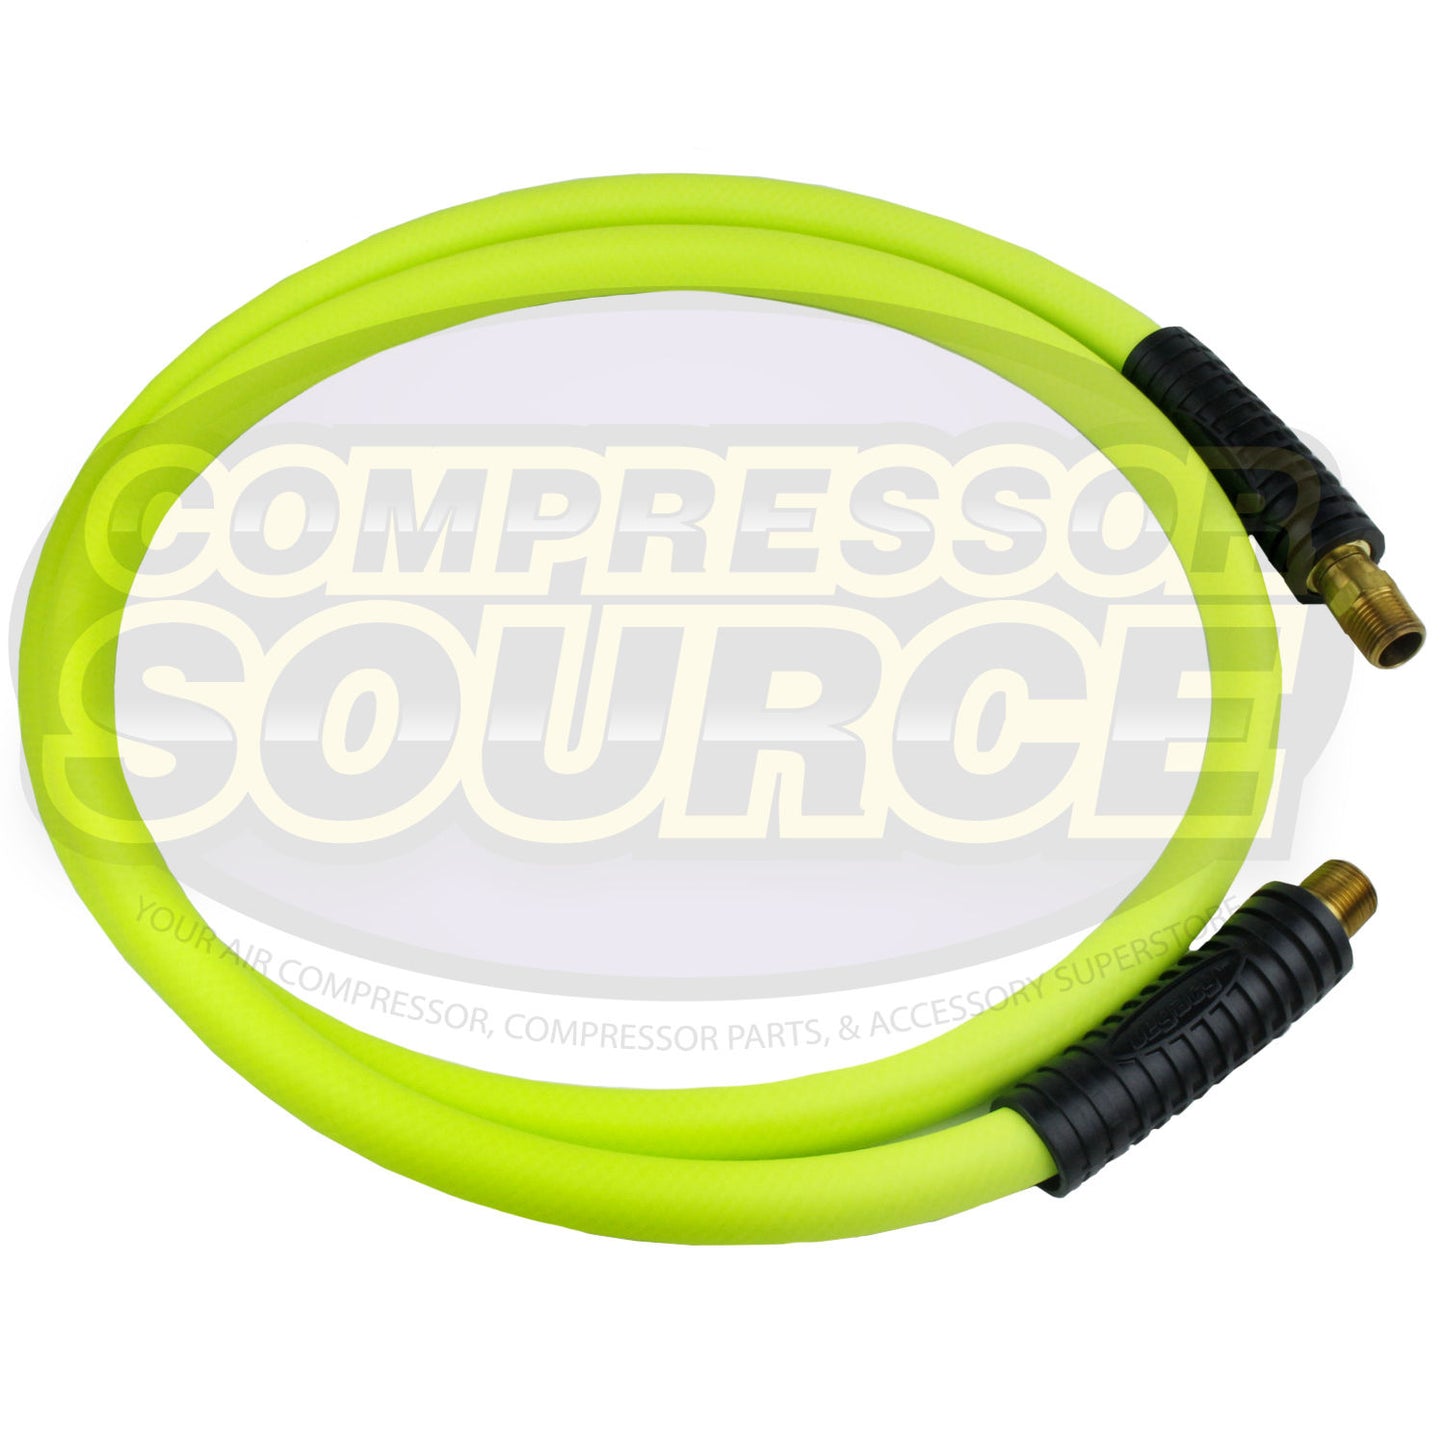 New Flexzilla 1/2" x 6' FT Air Hose Whip With 1/2' MNPT Swivel HFZ1206YW4S